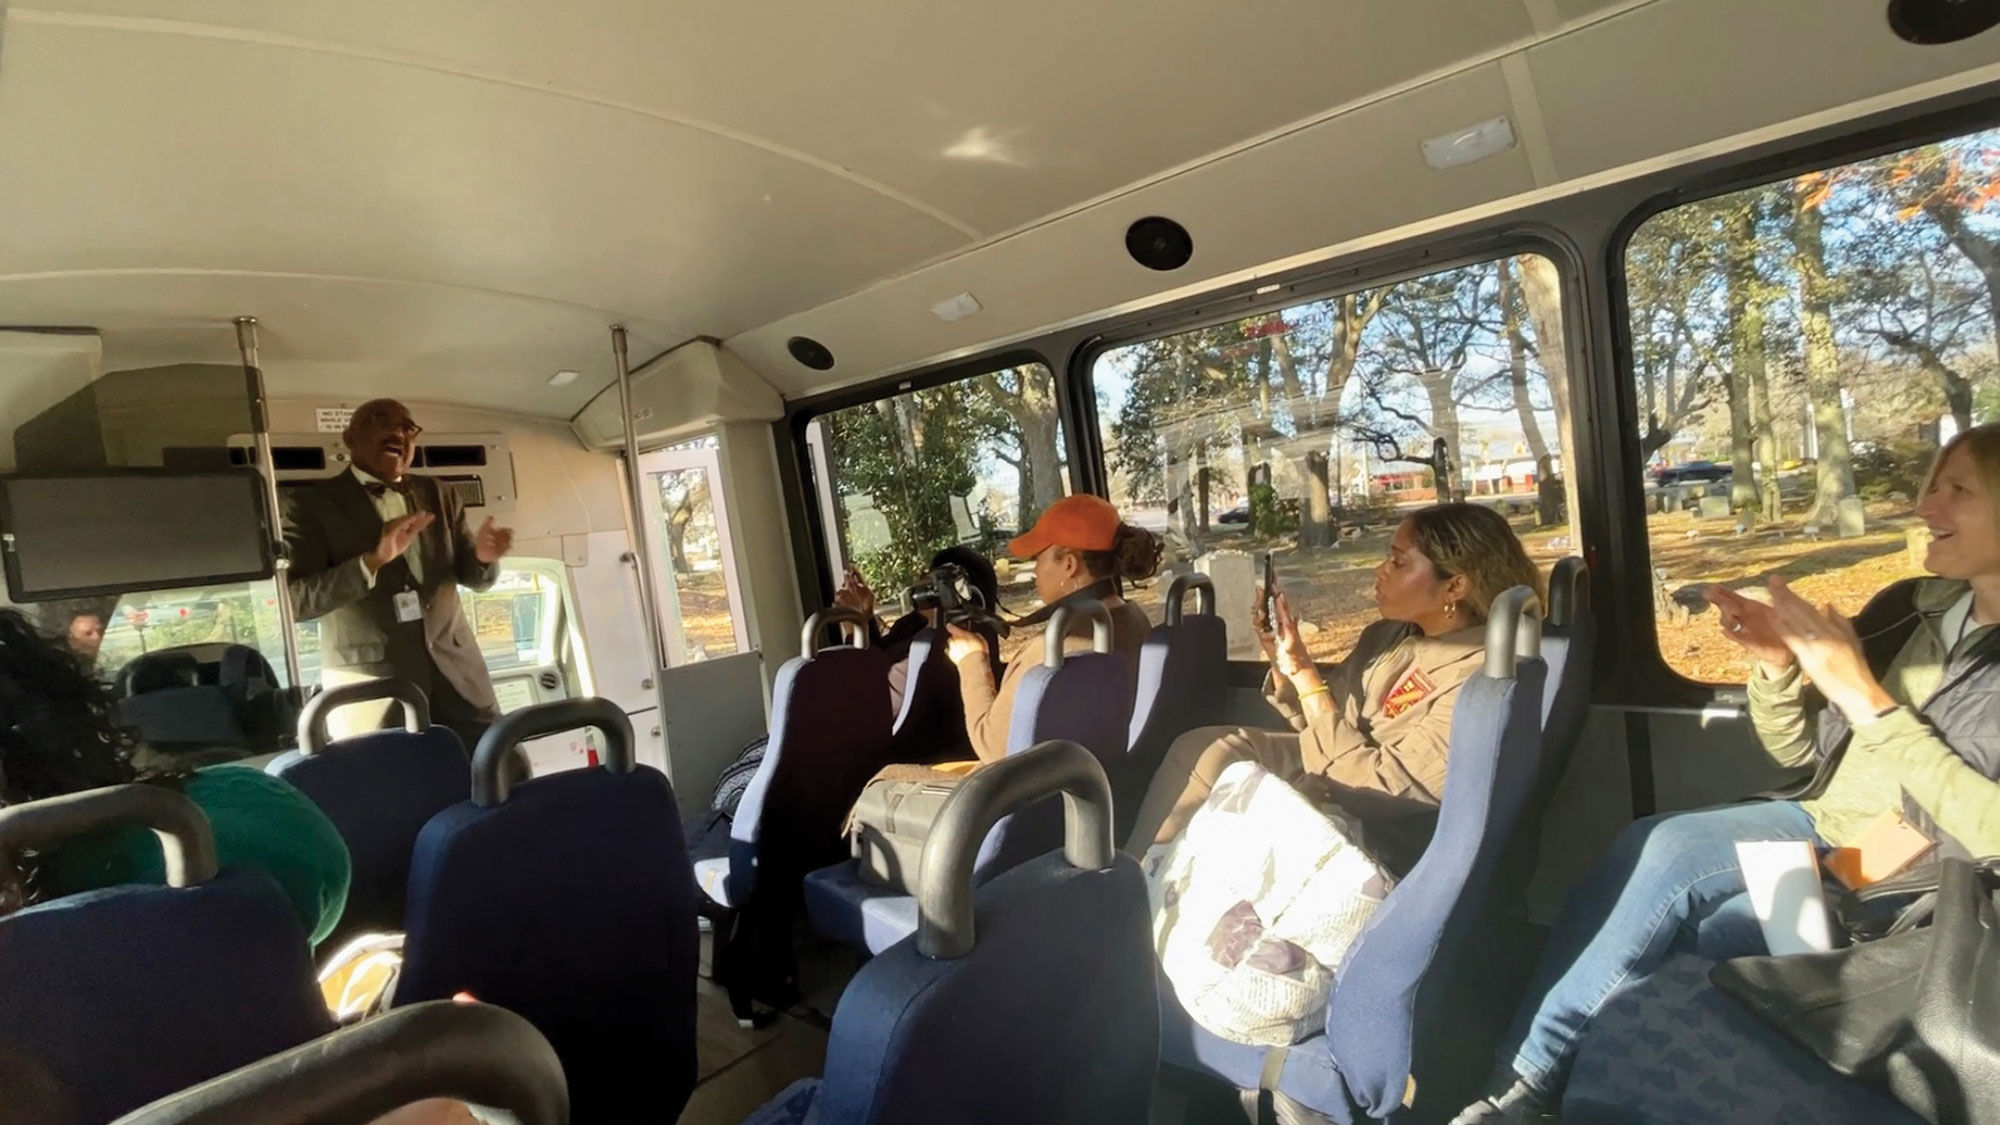 Al Harris, owner of Sites and Insights Tours, teaches his tour group the rhythms and songs of the Gullah Geechee.